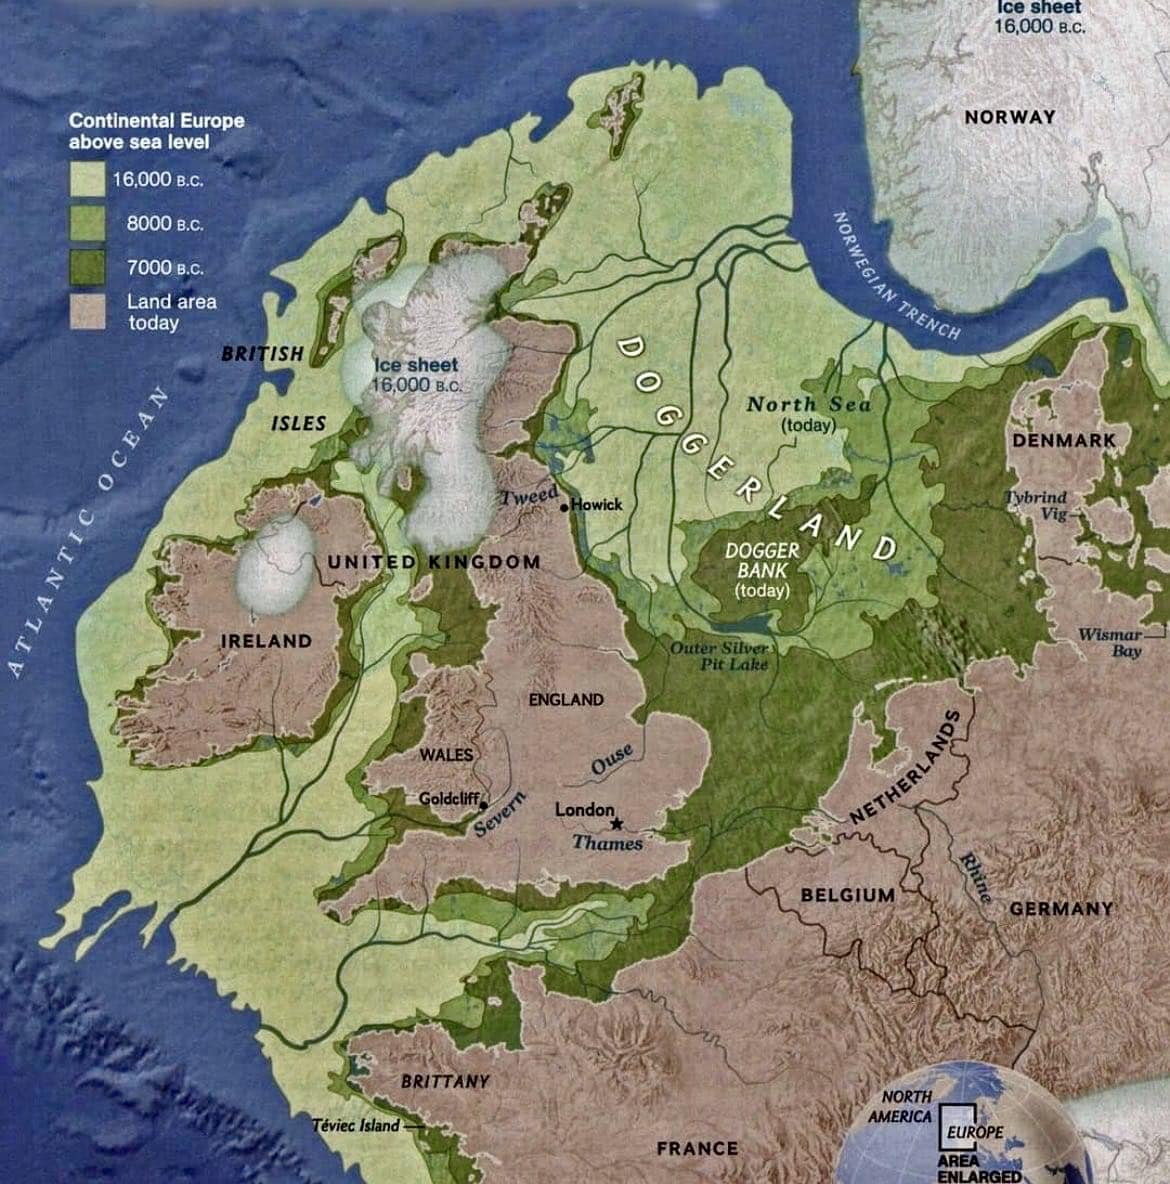 Map: Just 9000 years ago, Britain was connected to continental Europe by an area of land called Doggerland, which is now submerged beneath the southern North Sea